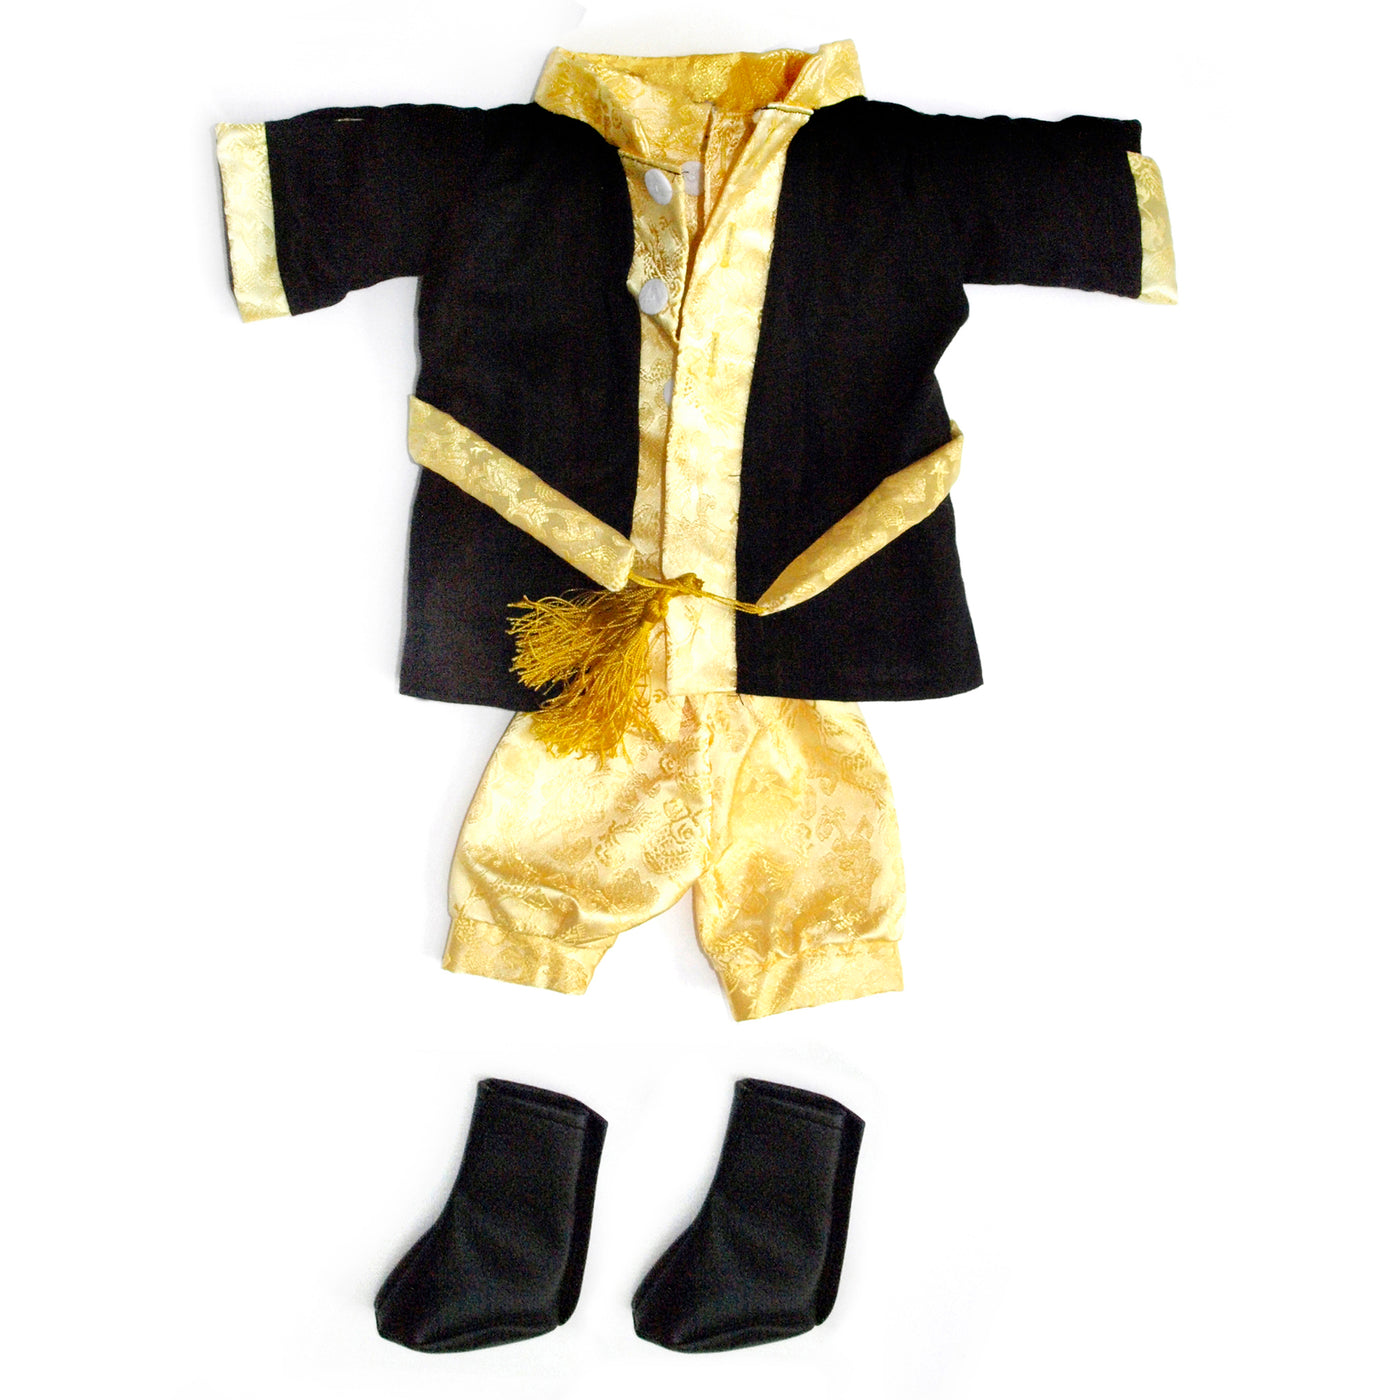 Russian Boy Costume, 46cm Hand Puppet clothes